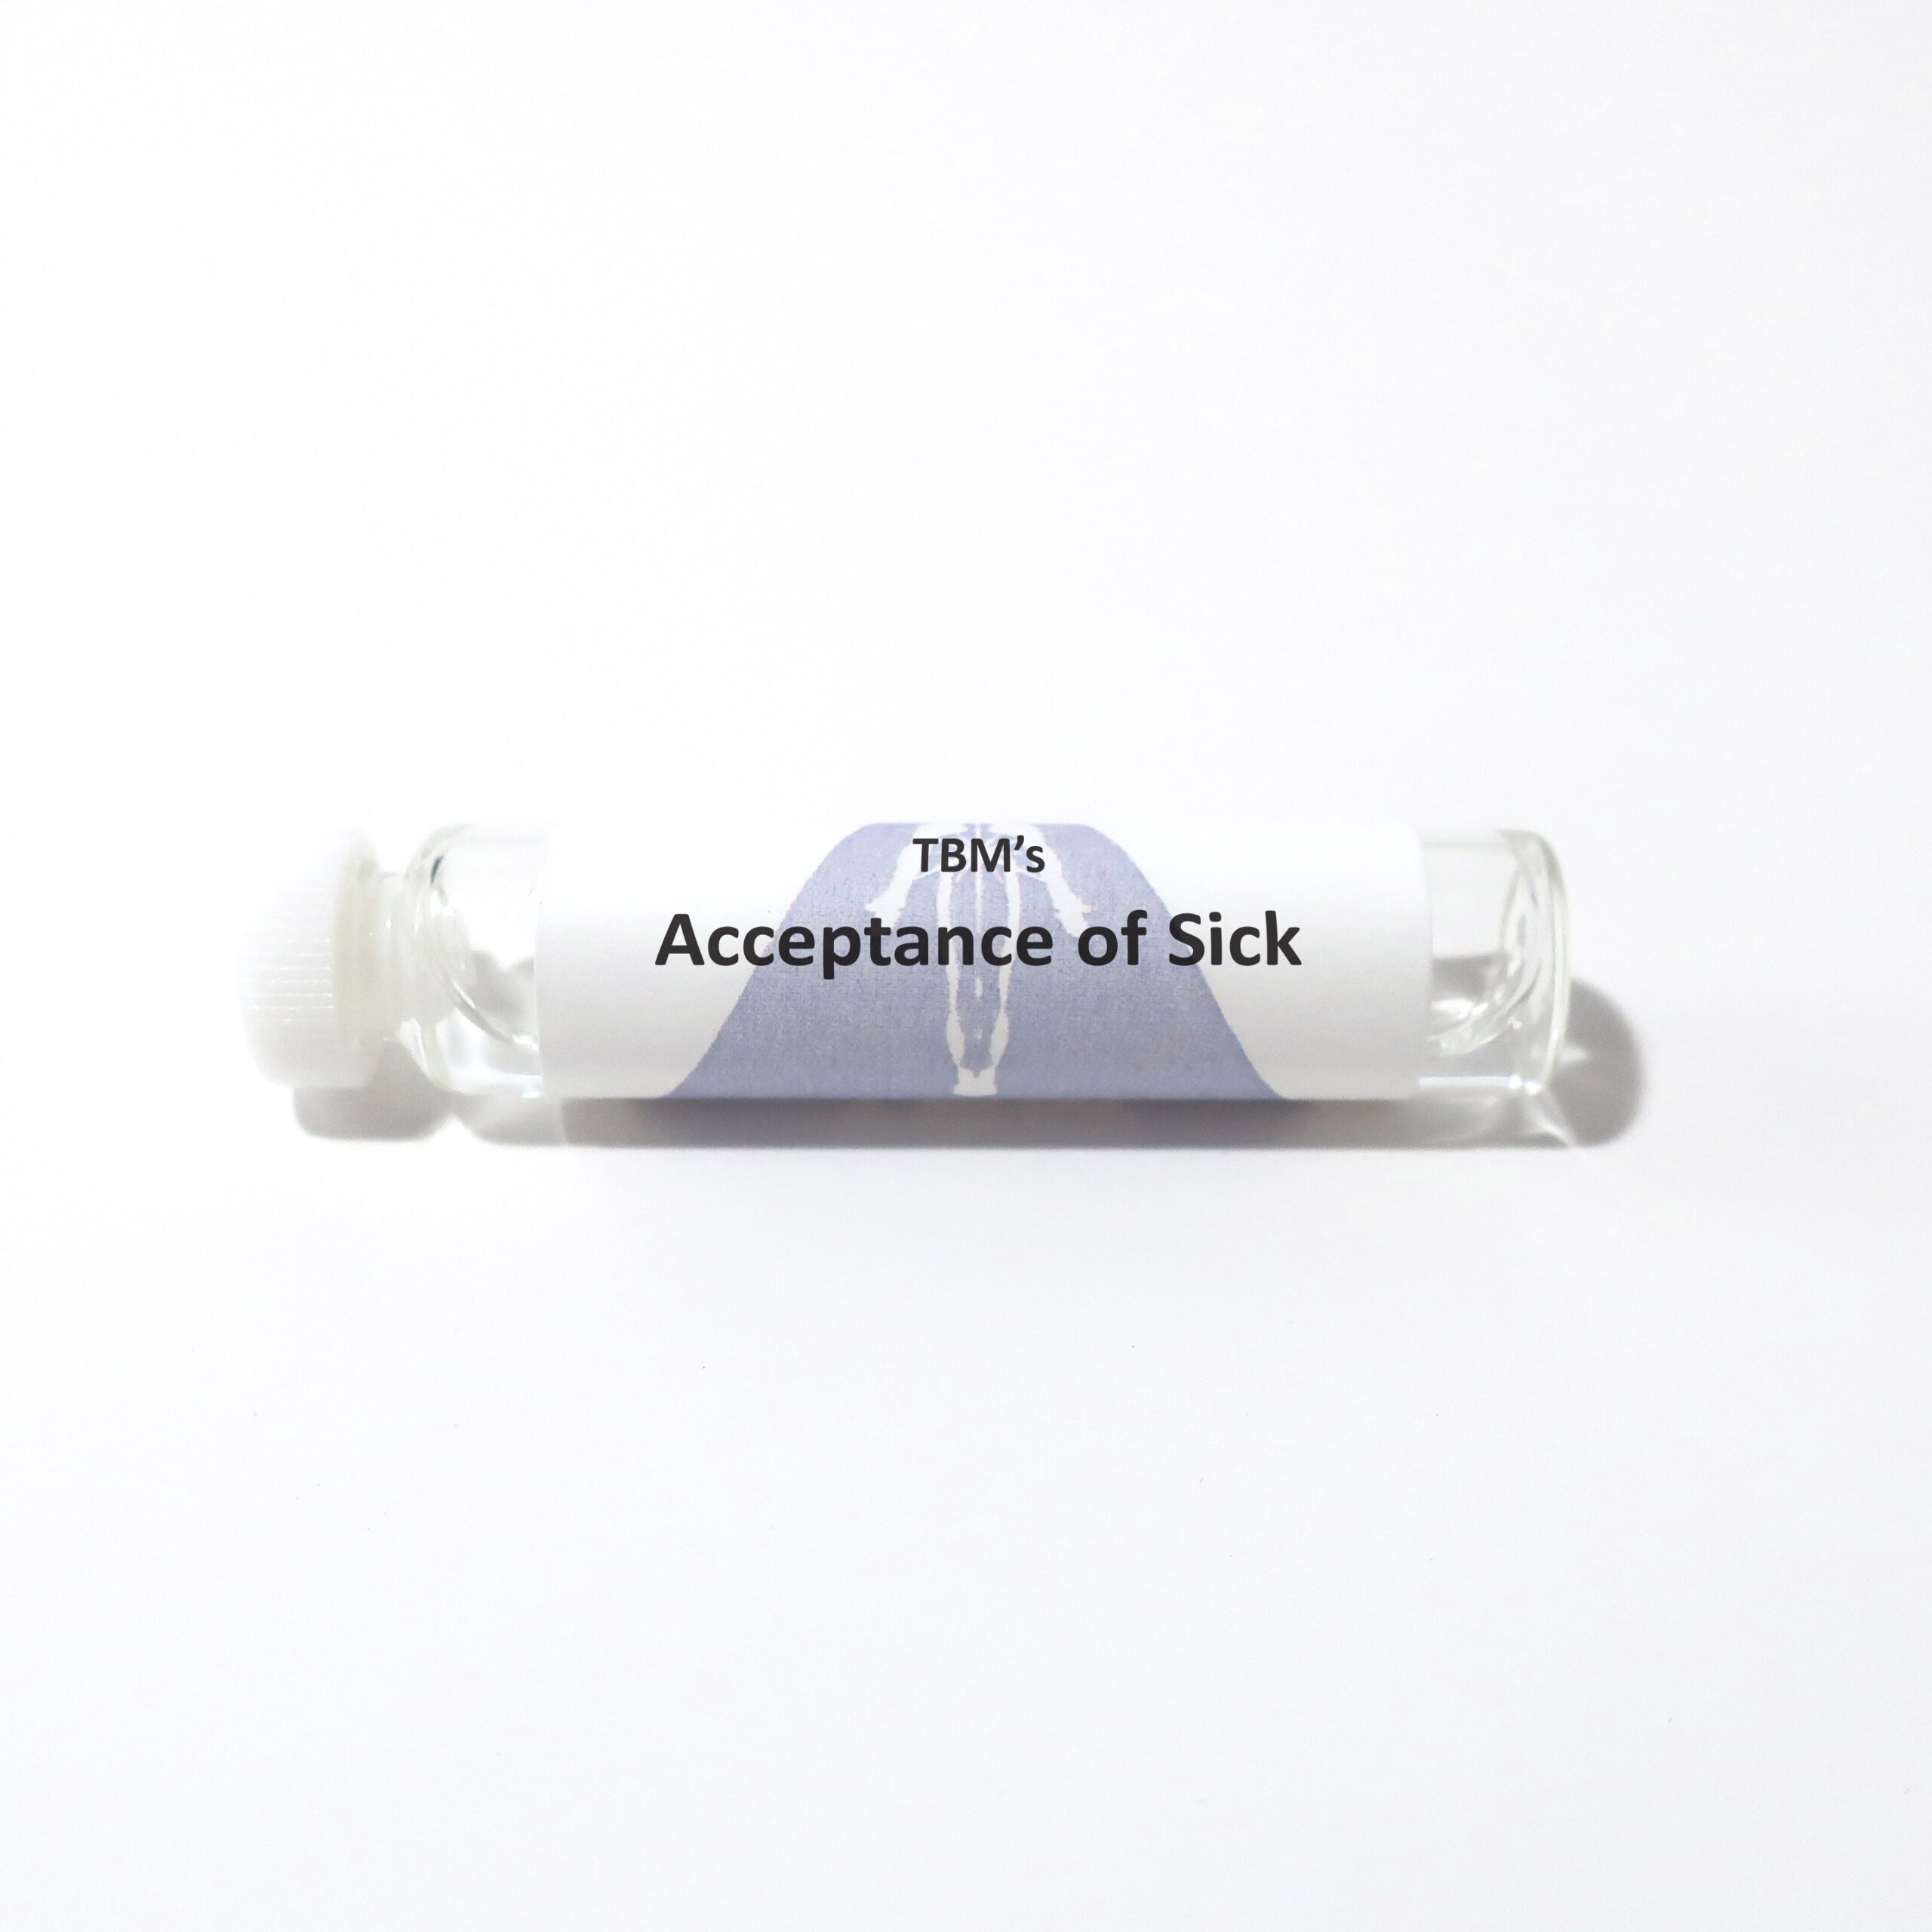 Acceptance of Sick